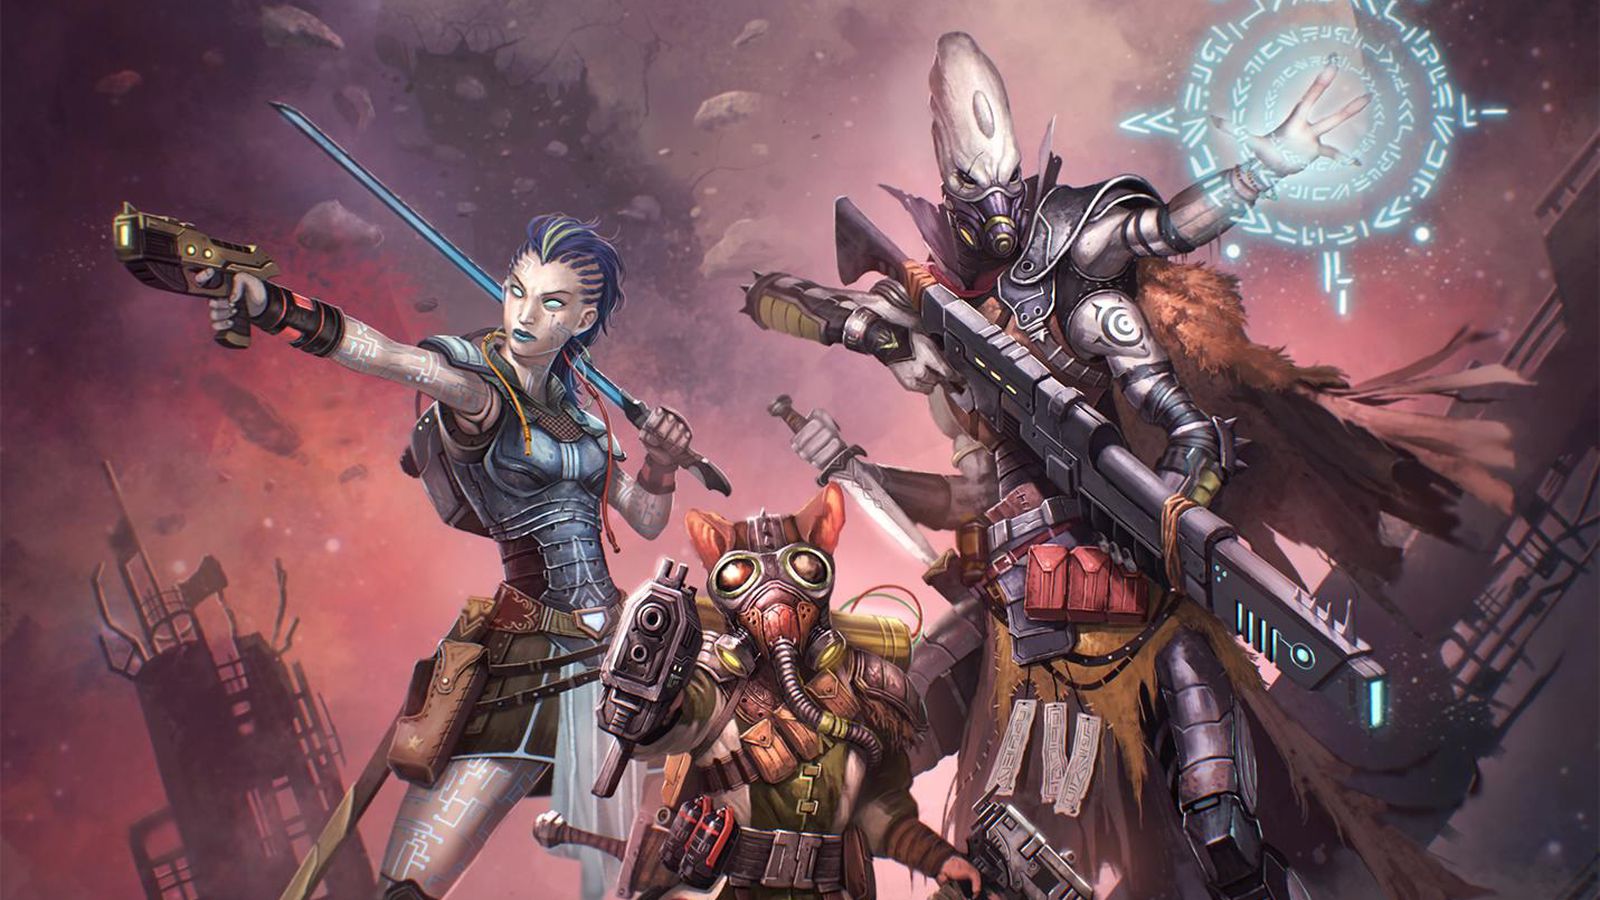 Starfinder hopes to do for space opera what D&D has done for fantasy.